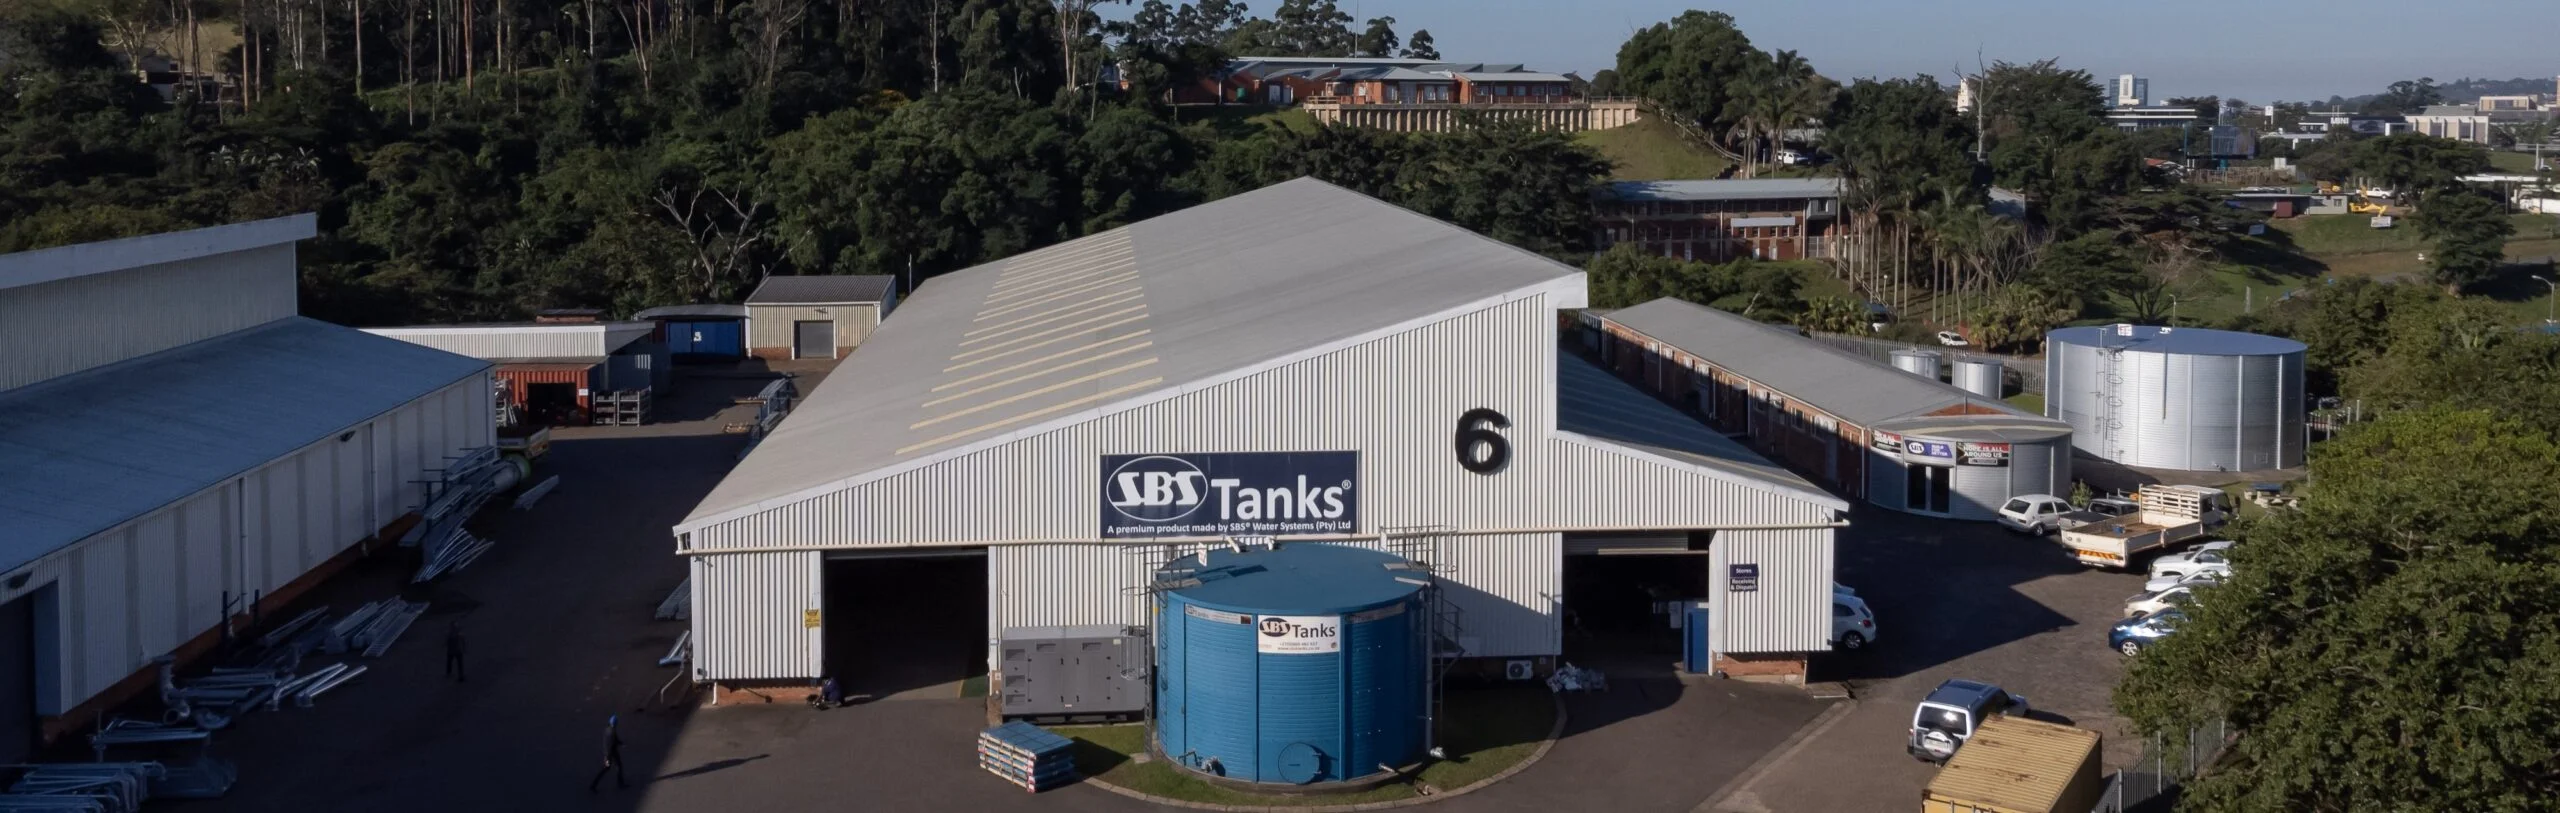 Industry leader in water storage tank manufacturing